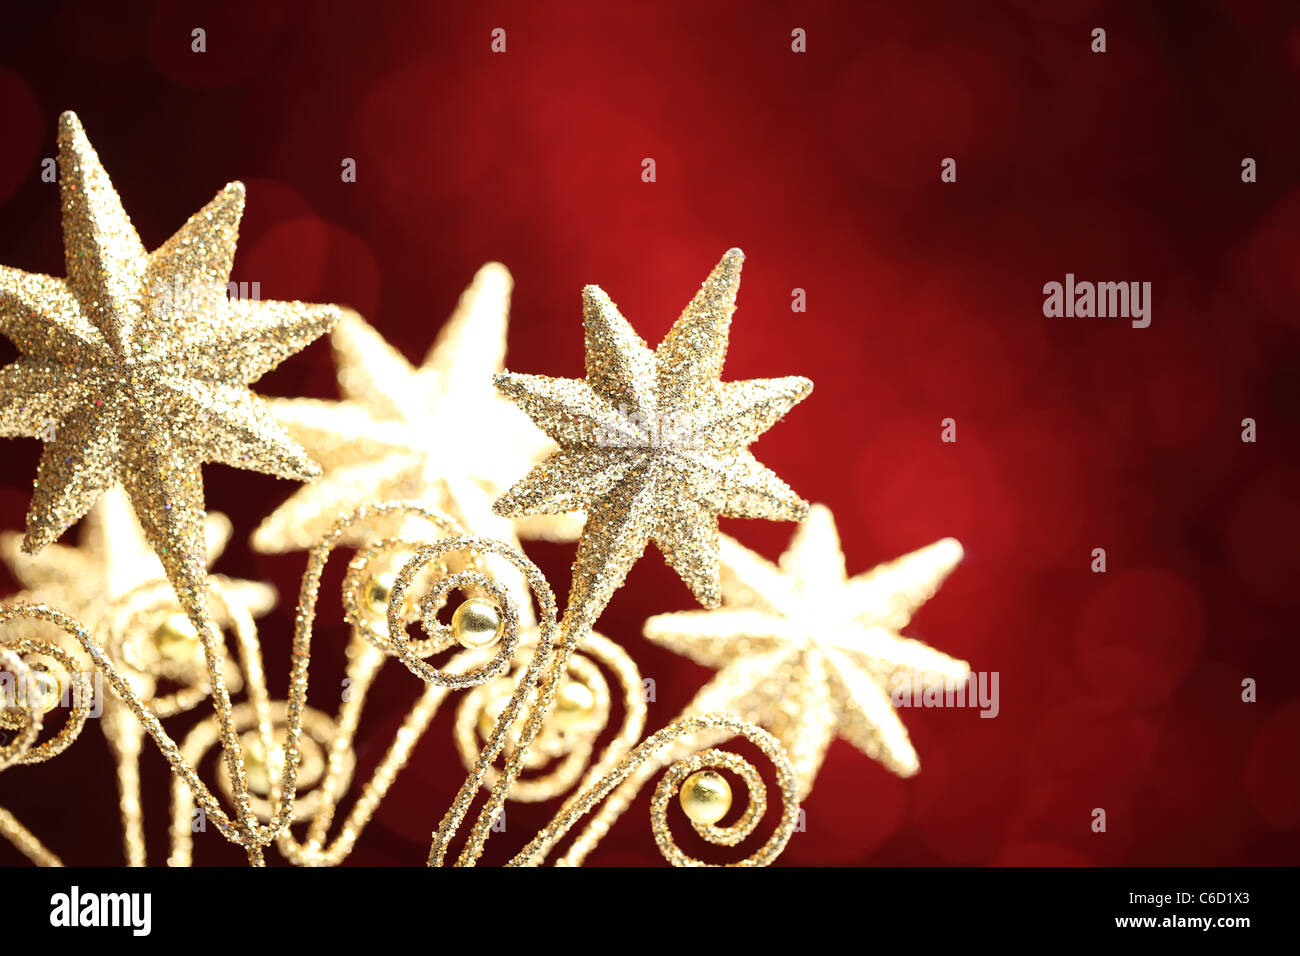 Closeup of golden star on red background.Shallow Dof. Stock Photo